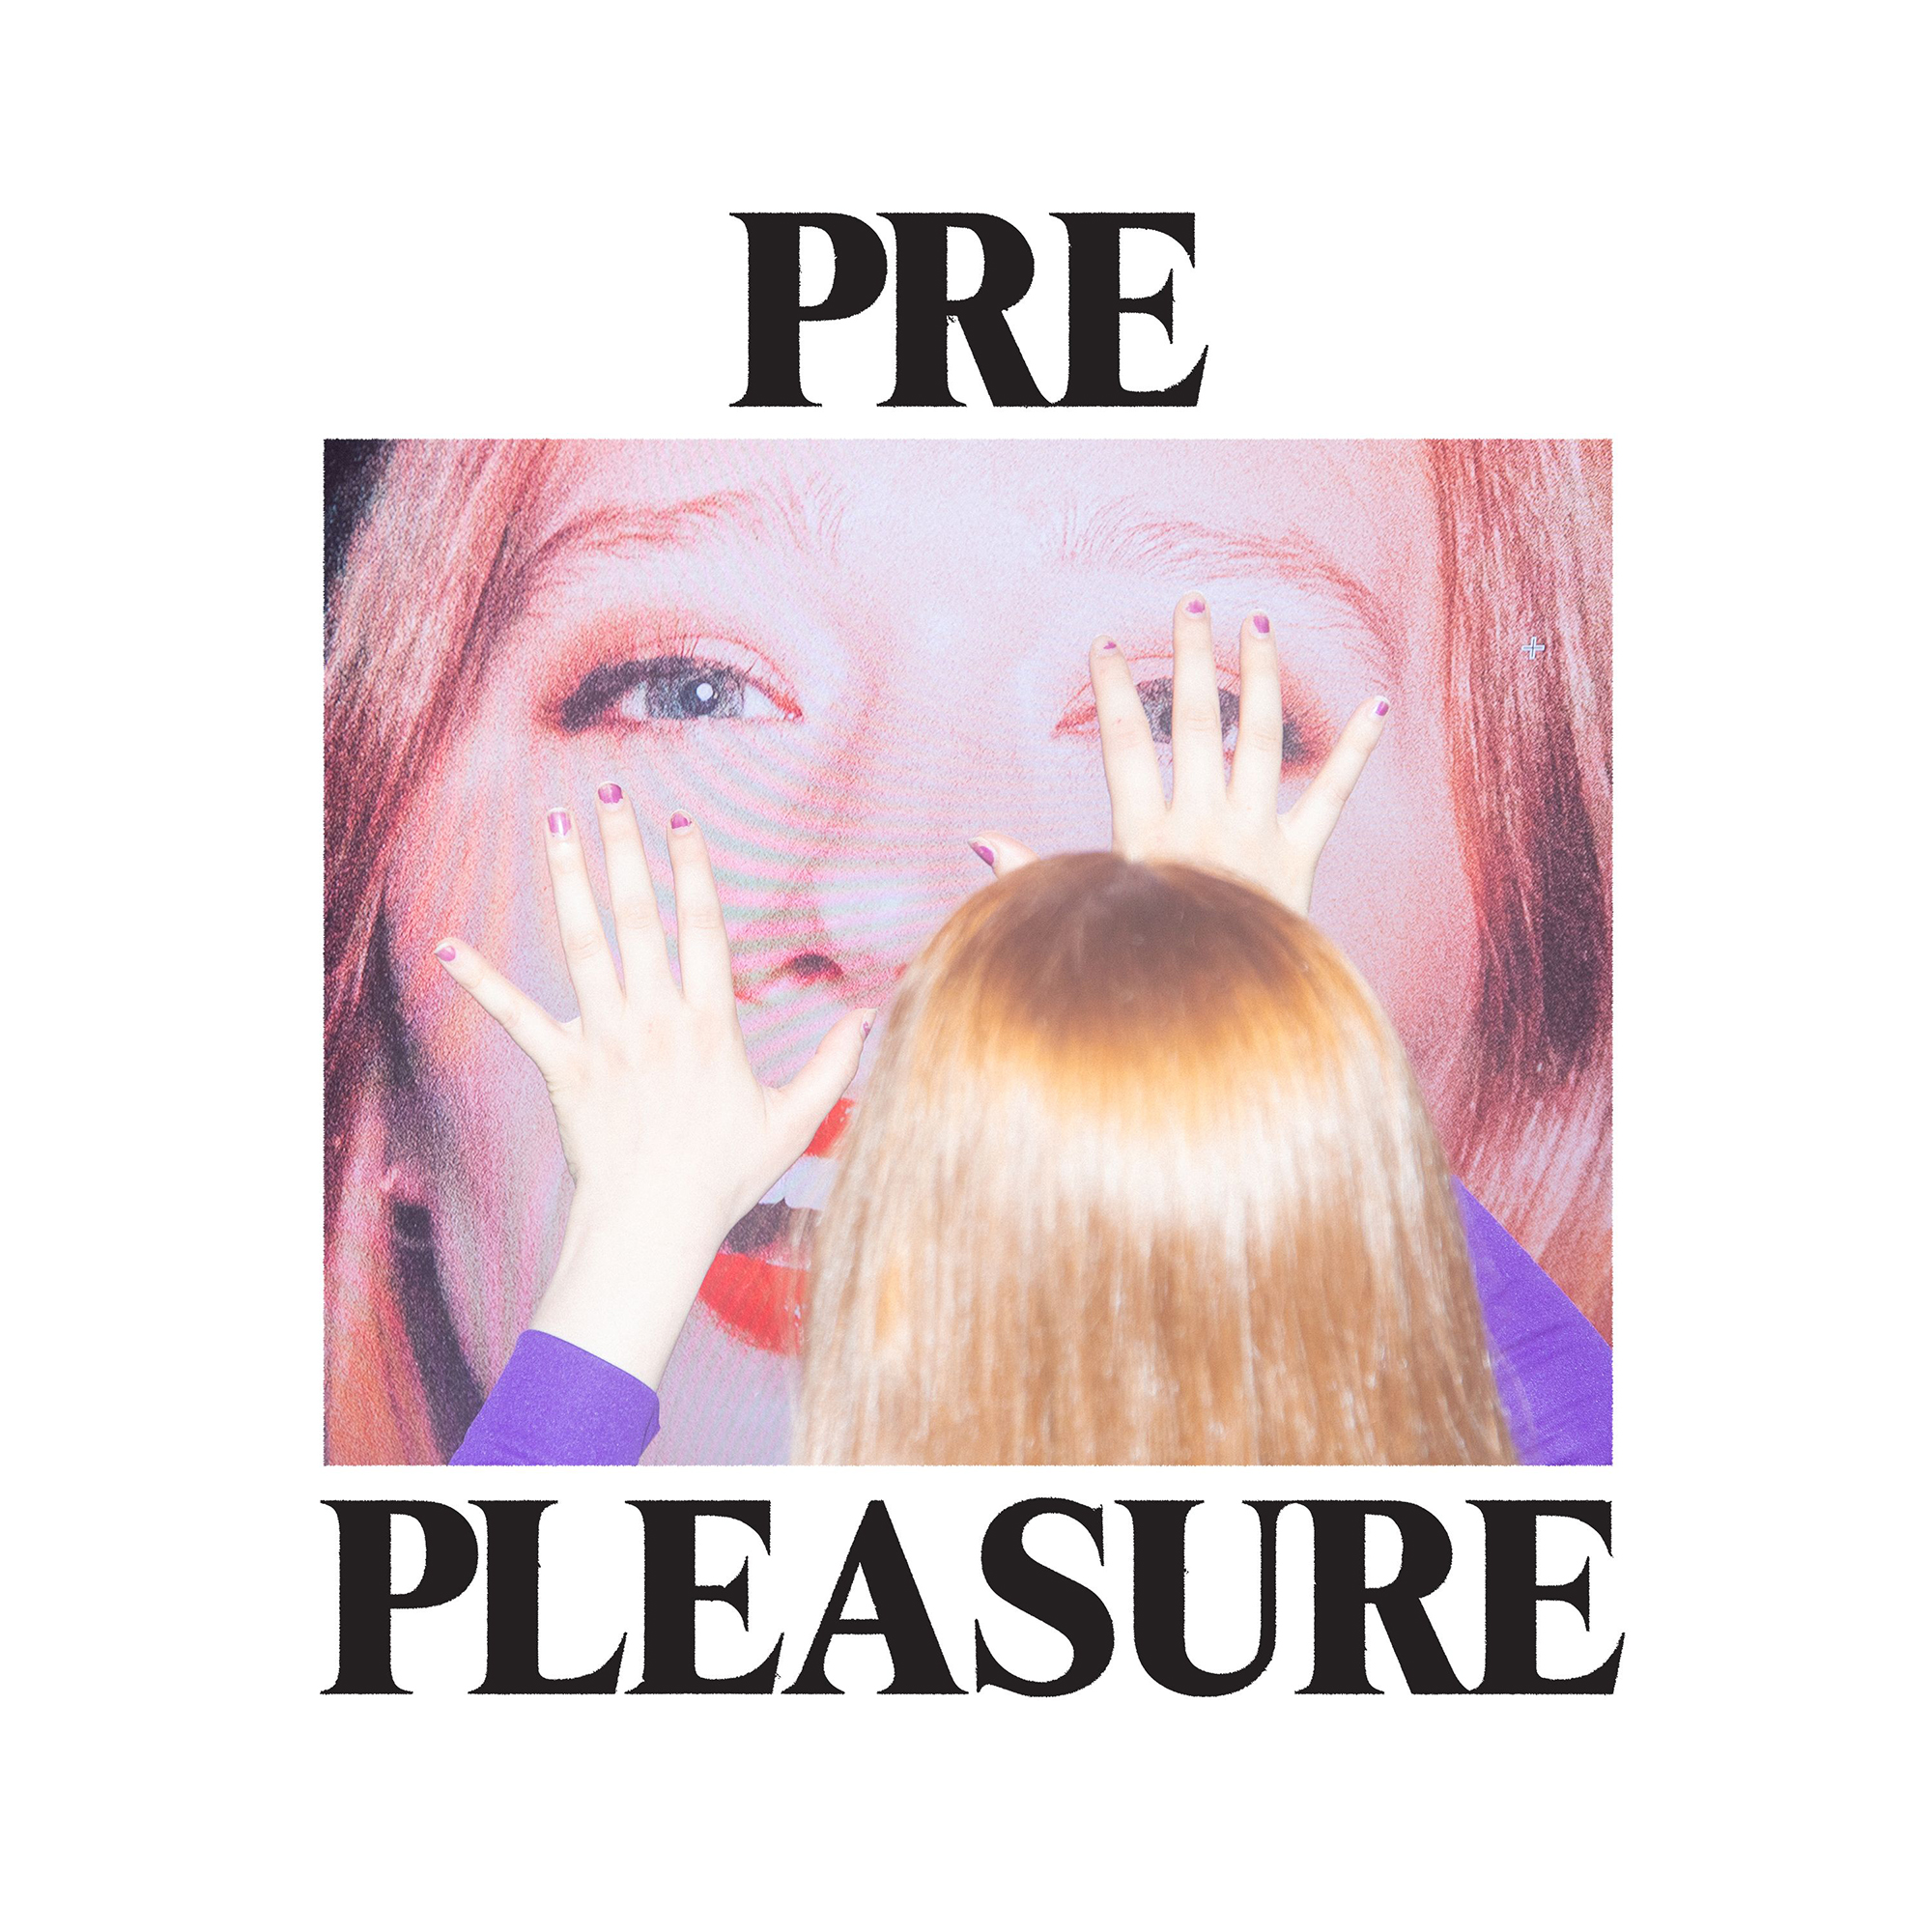 Jacklin Porn Video - Julia Jacklin - New album PRE PLEASURE out August 26, 2022. Pre-order now  and stream the first single, \